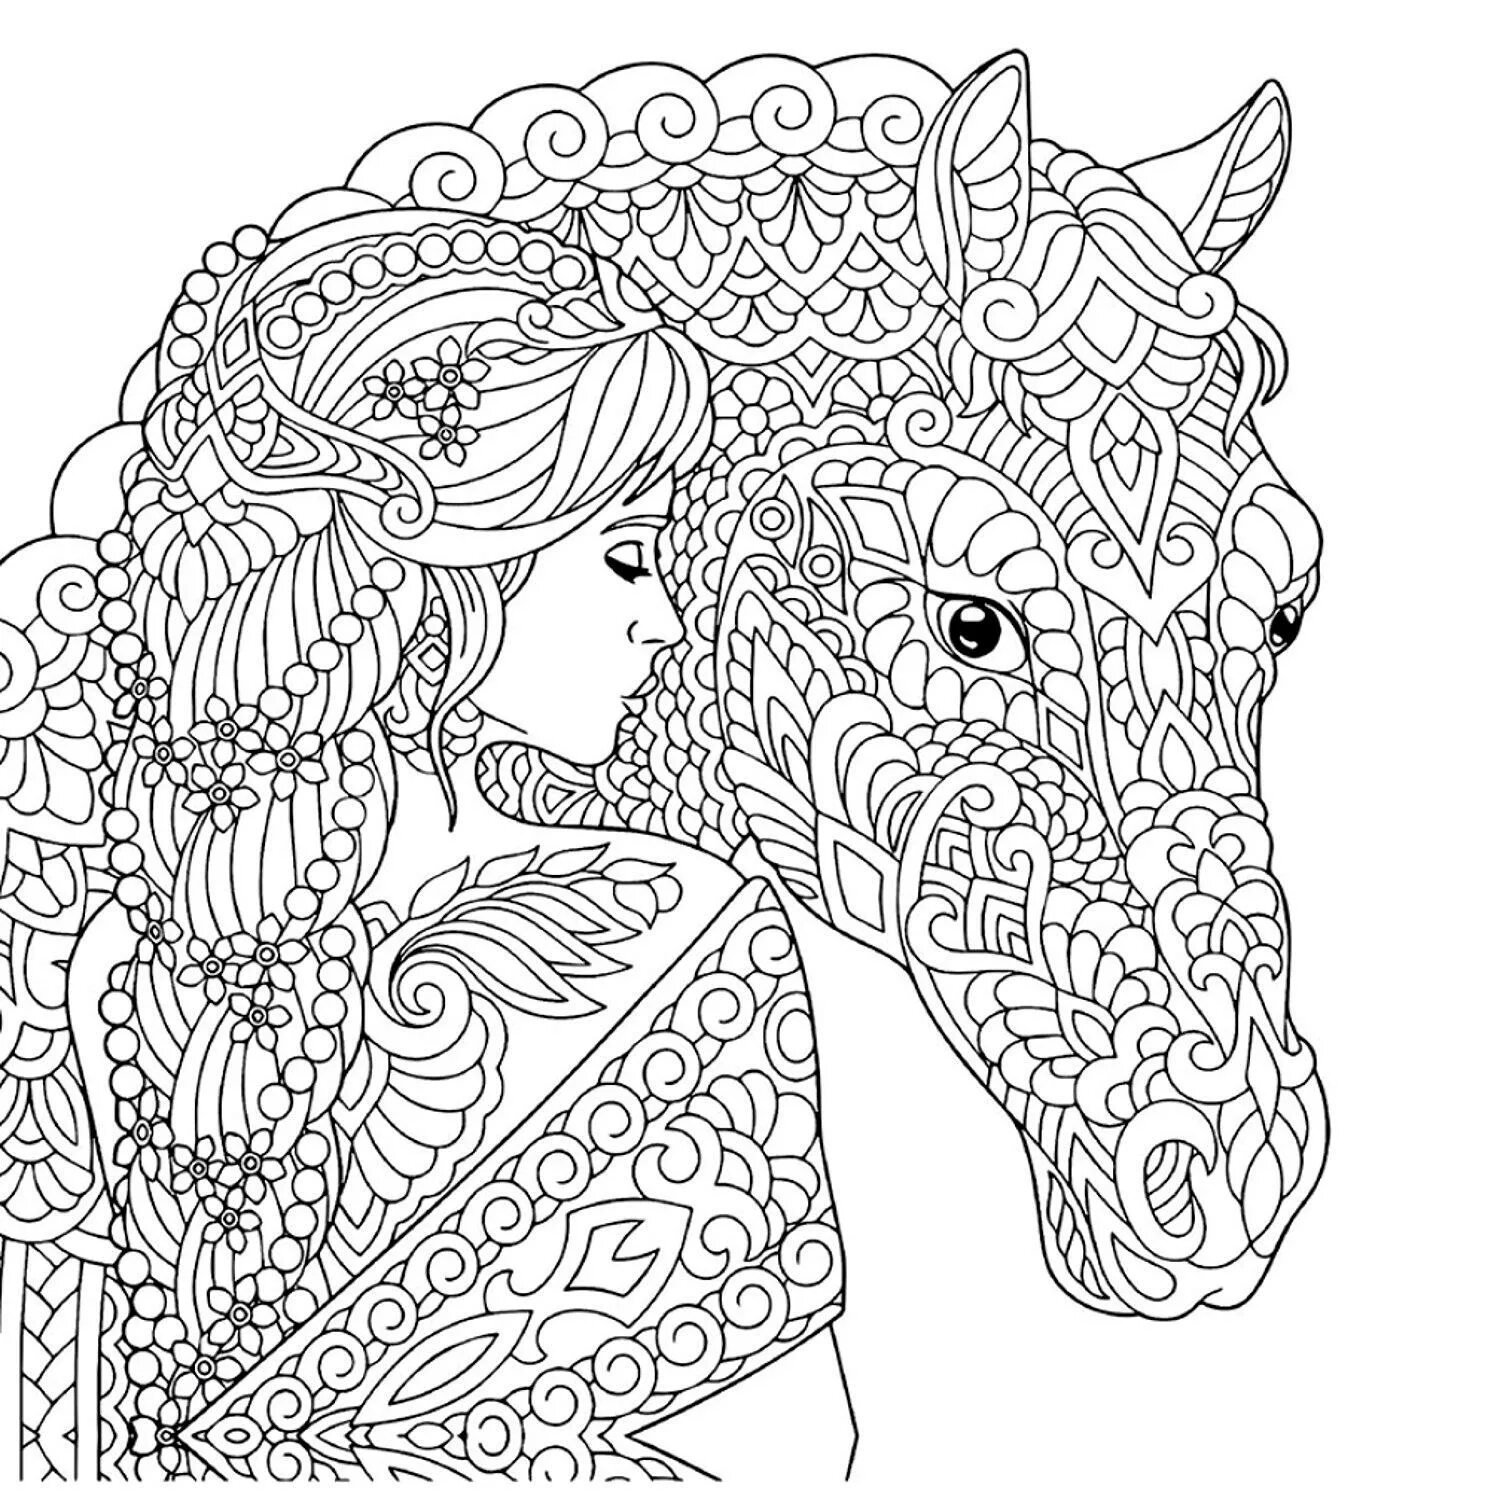 Joyfilled wildberry antistress coloring book